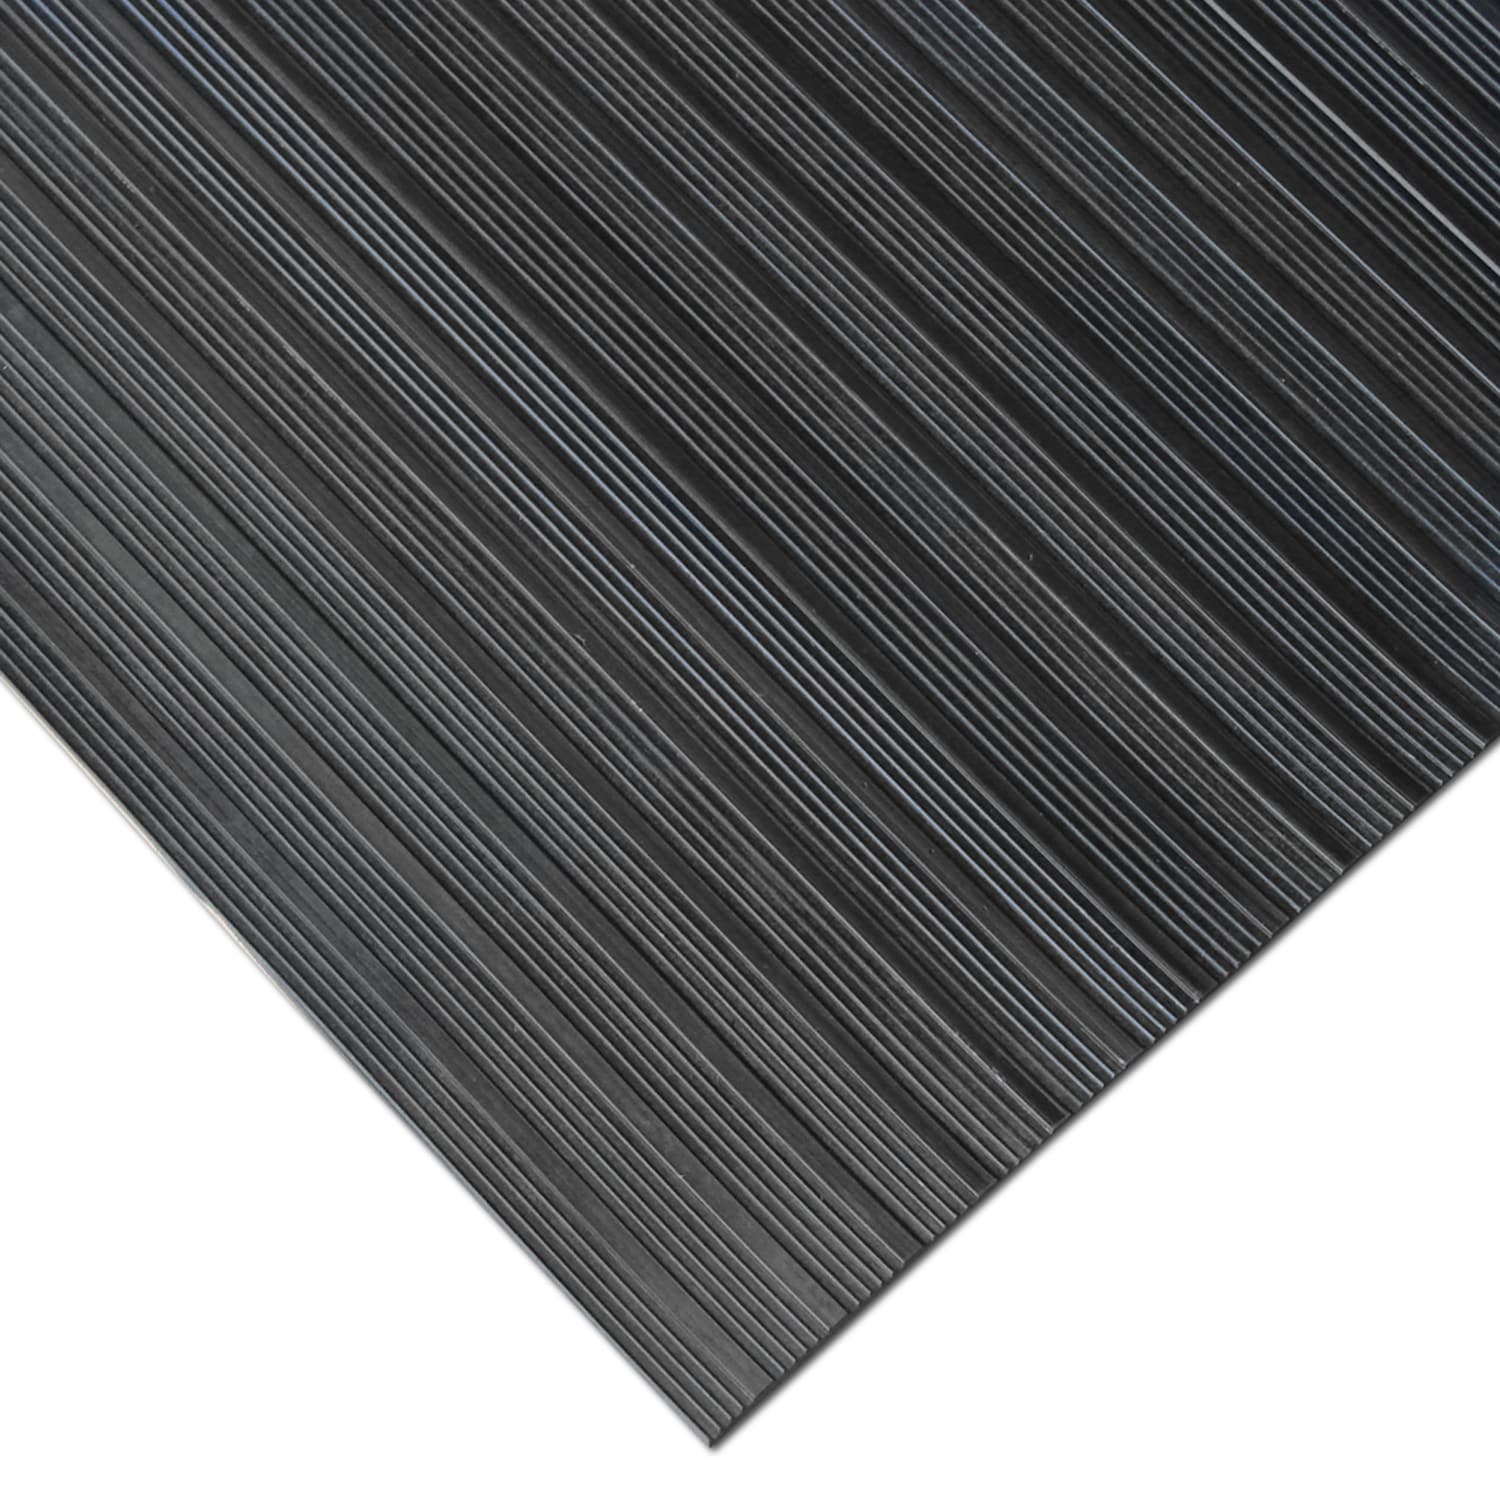 2' Width 1/8 thick Ribbed Rubber Runners Matting Black Choose